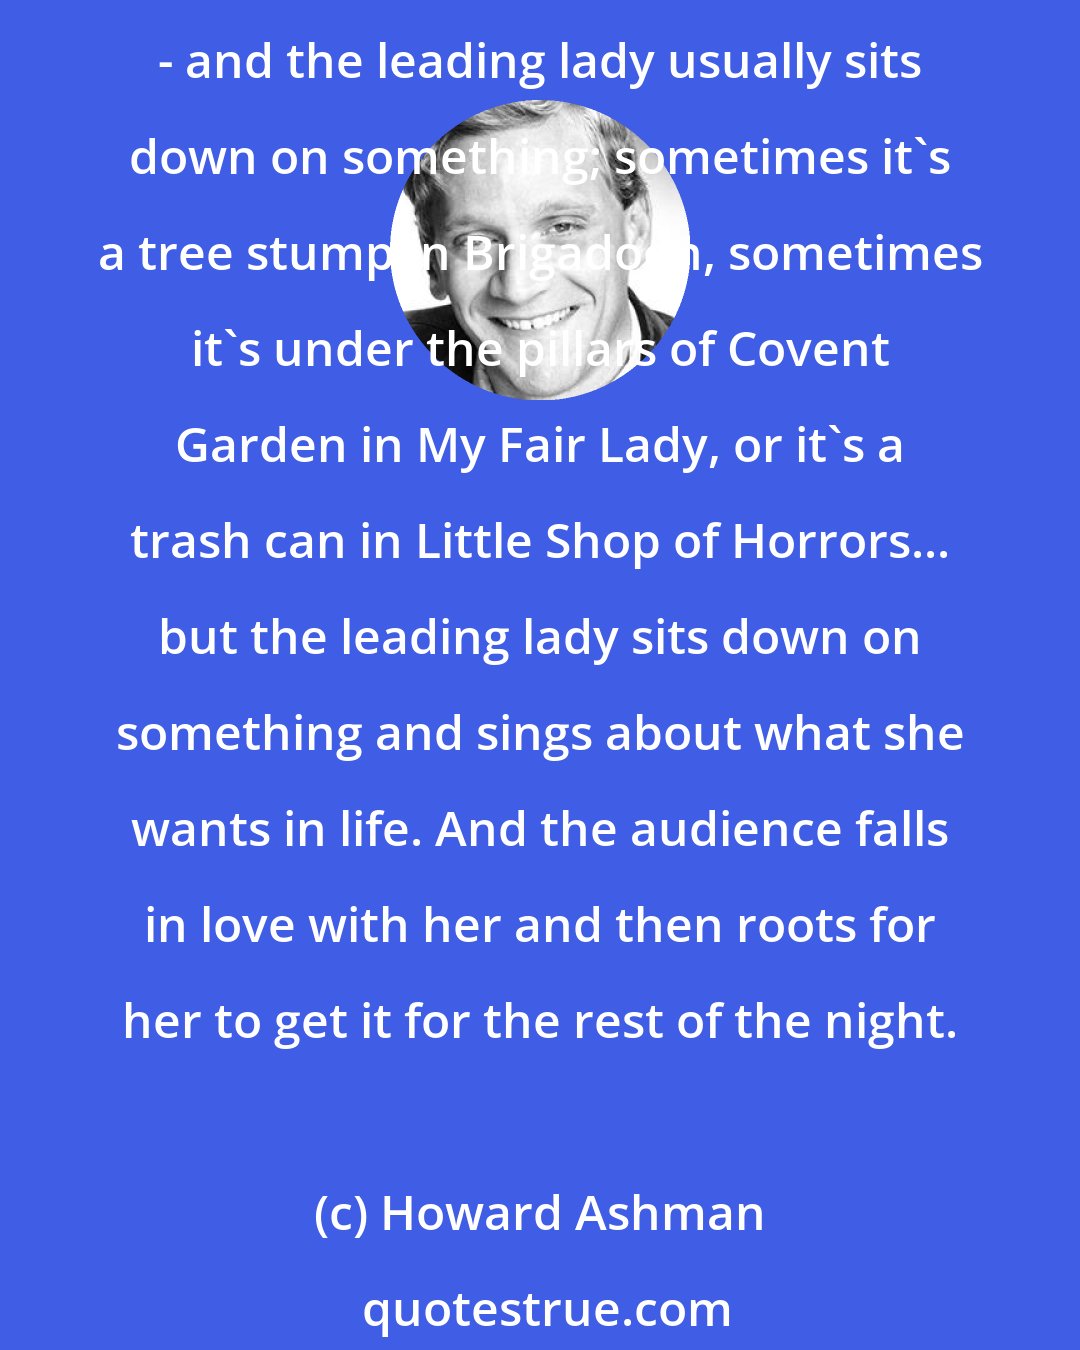 Howard Ashman: In almost every musical ever written, there's a place that's usually about the third song of the evening - sometimes it's the second, sometimes it's the fourth, but it's quite early - and the leading lady usually sits down on something; sometimes it's a tree stump in Brigadoon, sometimes it's under the pillars of Covent Garden in My Fair Lady, or it's a trash can in Little Shop of Horrors... but the leading lady sits down on something and sings about what she wants in life. And the audience falls in love with her and then roots for her to get it for the rest of the night.